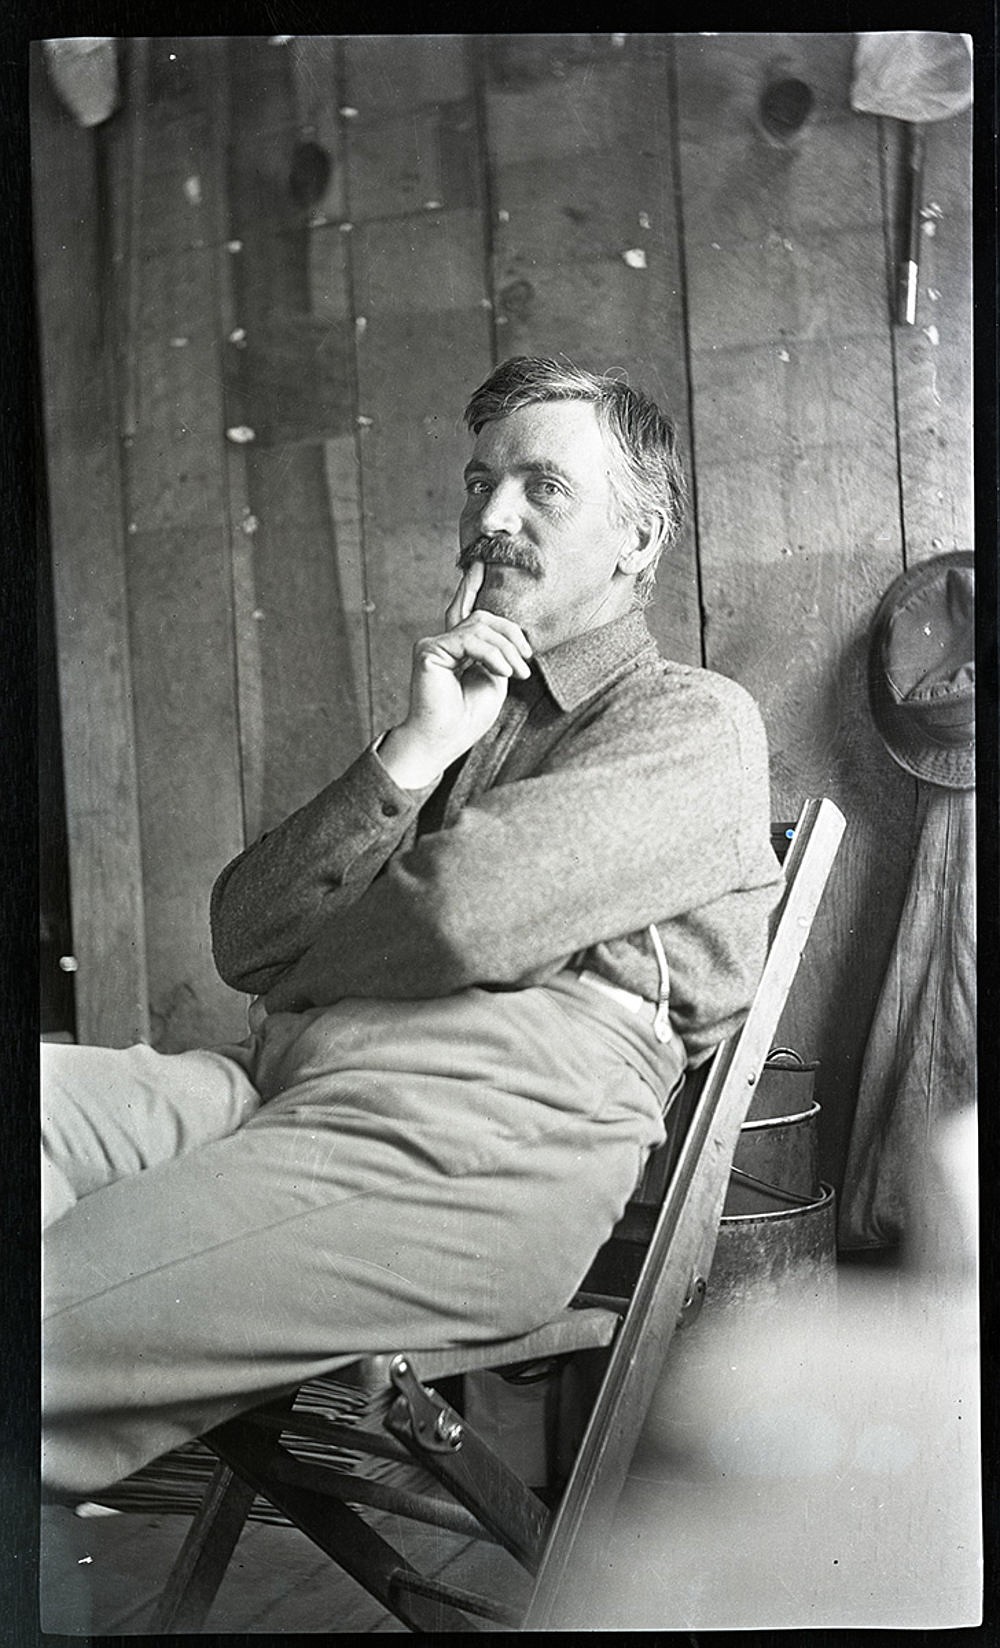 Morton J. Elrod founded the Flathead Lake Biological Station. (Photo courtesy of Archives and Special Collections, Mansfield Library University of Montana)